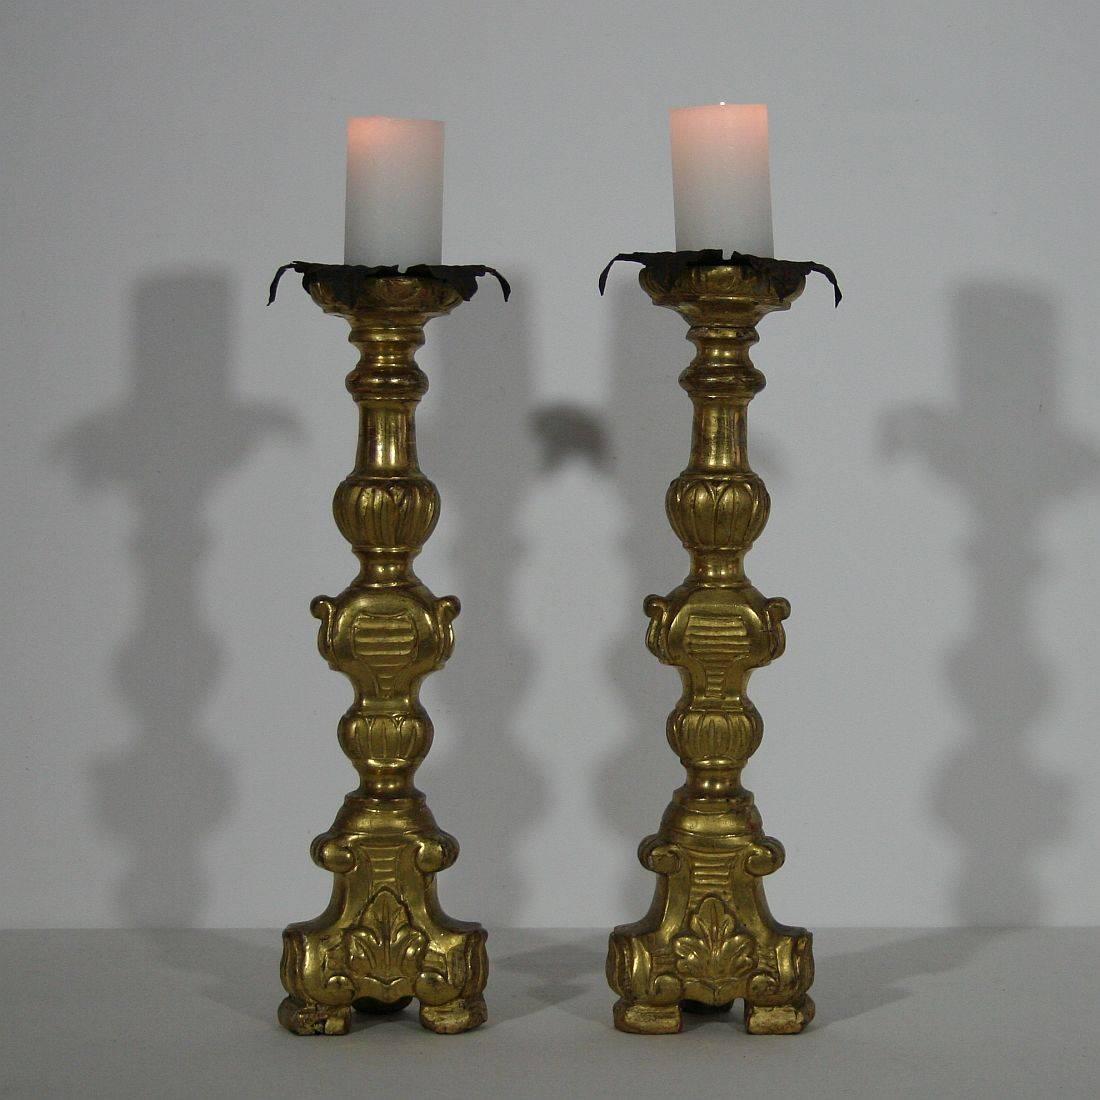 Great pair of carved wooden and gilded candleholders
Italy, circa 1750
Weathered, small losses and old repairs.
More pictures are available on request.